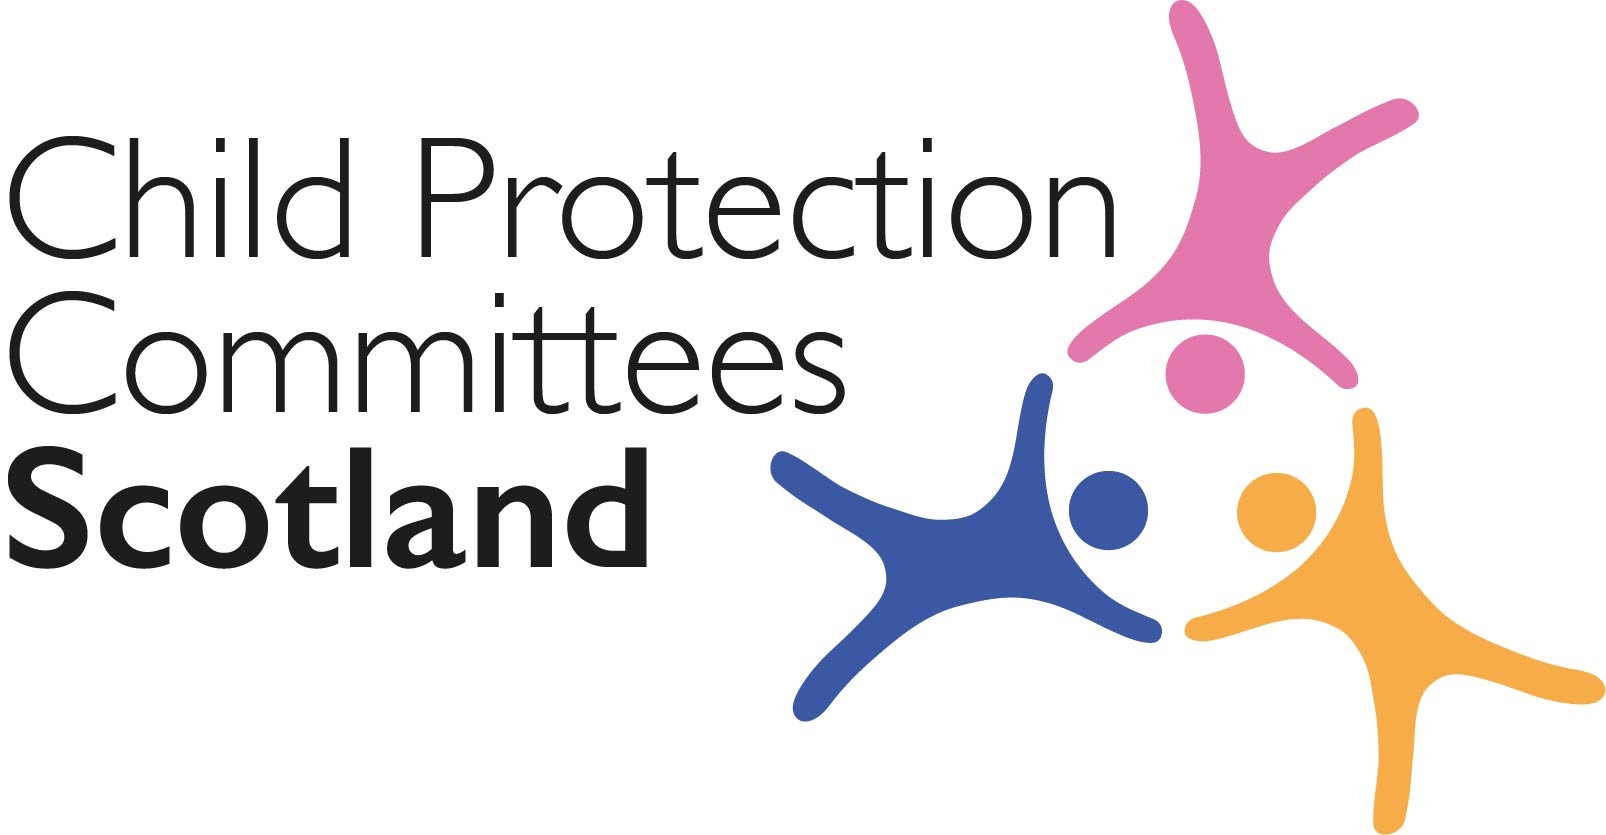 child protection committees scotland logo